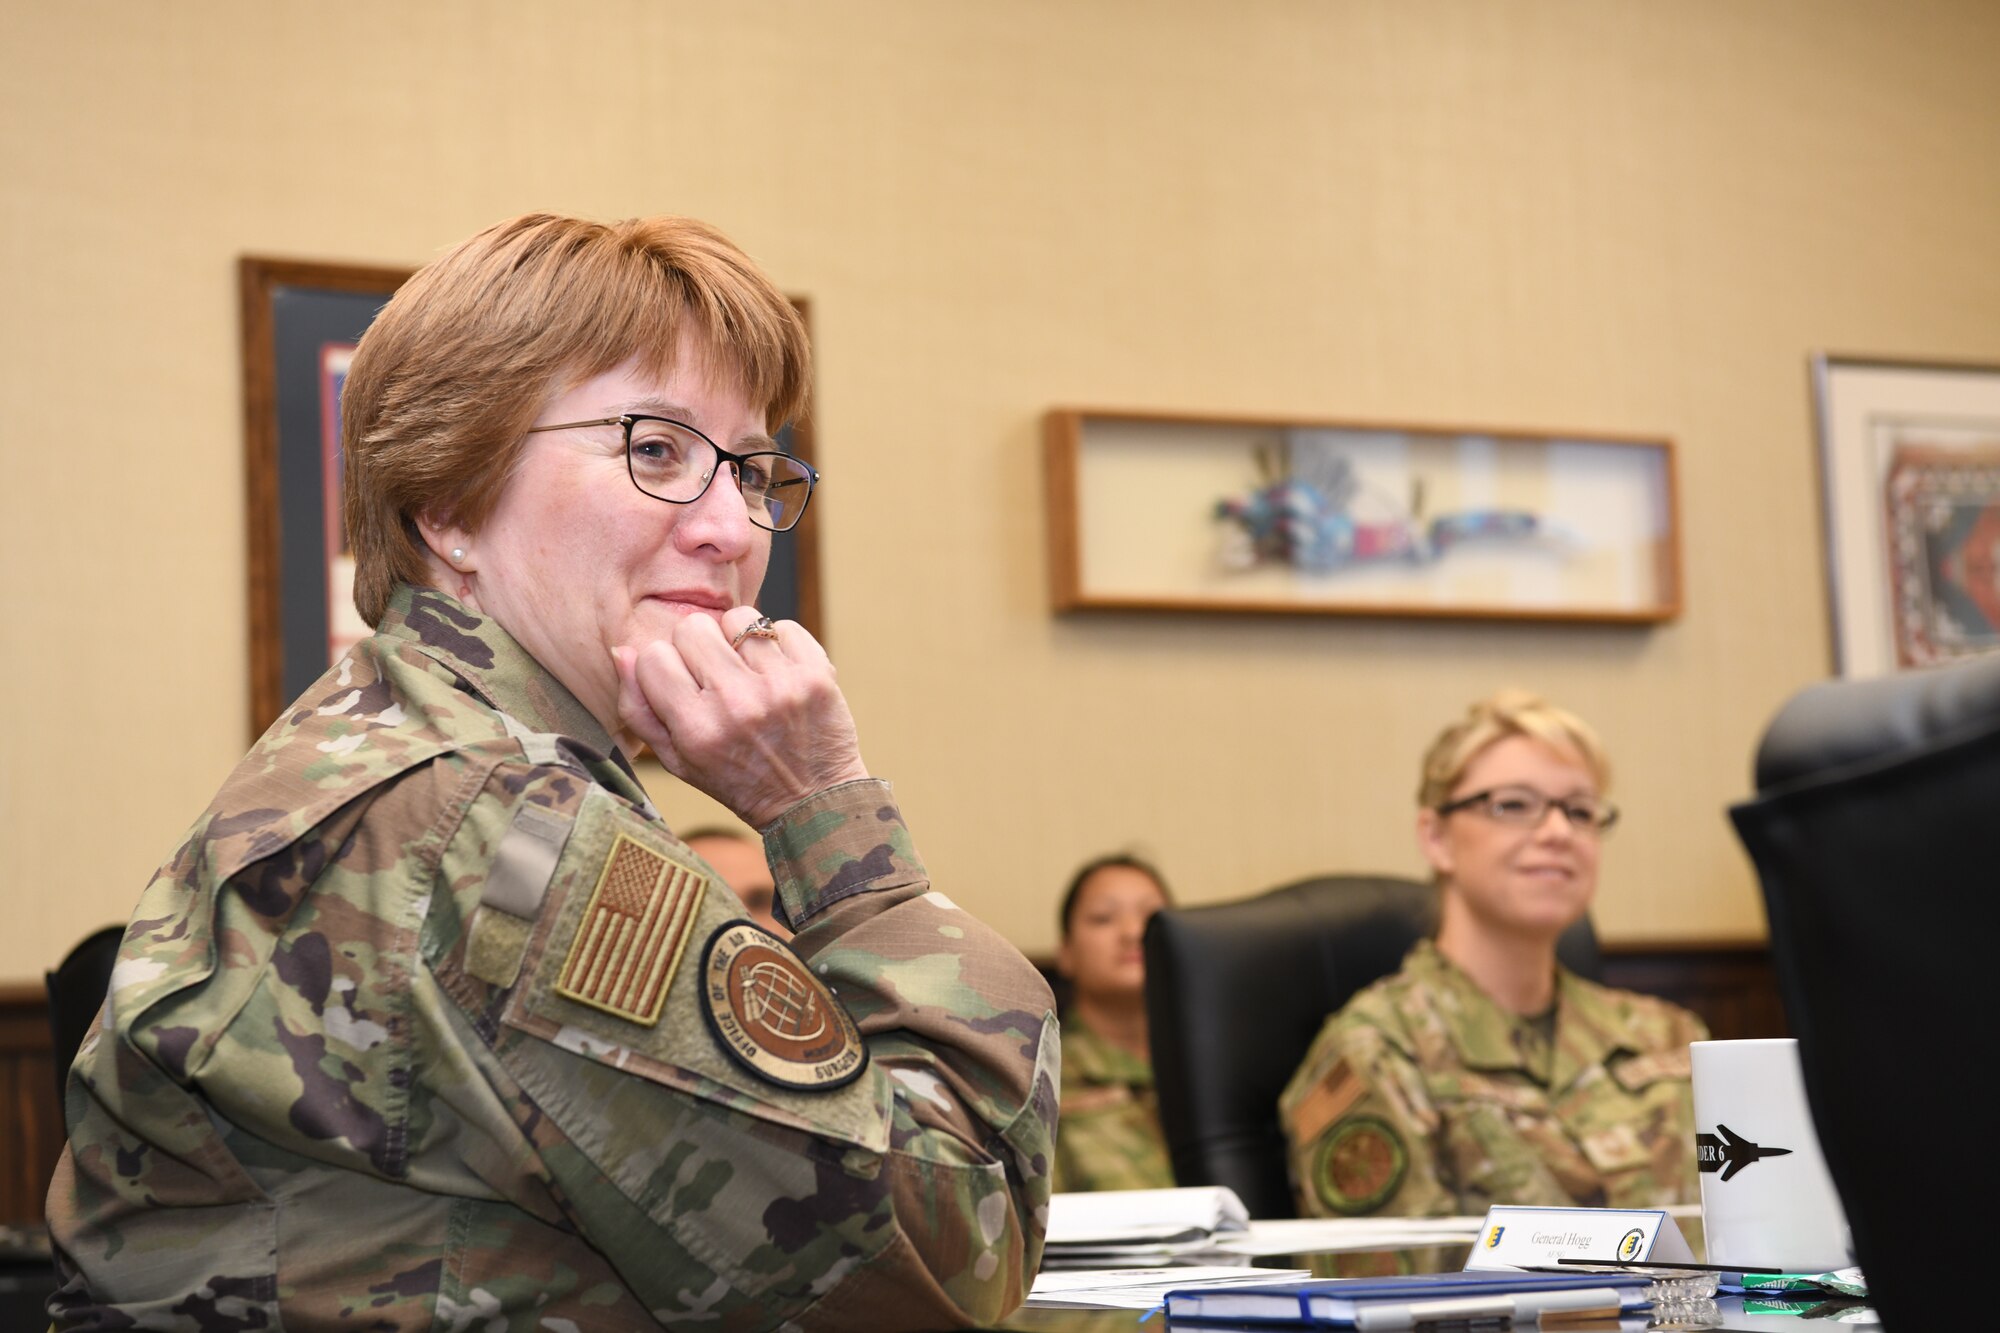 Lt. Gen. Dorothy Hogg, the Air Force Surgeon General, receives a 28th Bomb Wing mission brief at Ellsworth Air Force Base, S.D., Jan. 30, 2020. The Air Force surgeon general is responsible for developing plans, programs and procedures in support of worldwide Air Force operations. (U.S. Air Force photo by Senior Airman Nicolas Z. Erwin)Lt. Gen. Dorothy Hogg, the Air Force Surgeon General, receives a 28th Bomb Wing mission brief at Ellsworth Air Force Base, S.D., Jan. 30, 2020. The Air Force surgeon general is responsible for developing plans, programs and procedures in support of worldwide Air Force operations. (U.S. Air Force photo by Senior Airman Nicolas Z. Erwin)